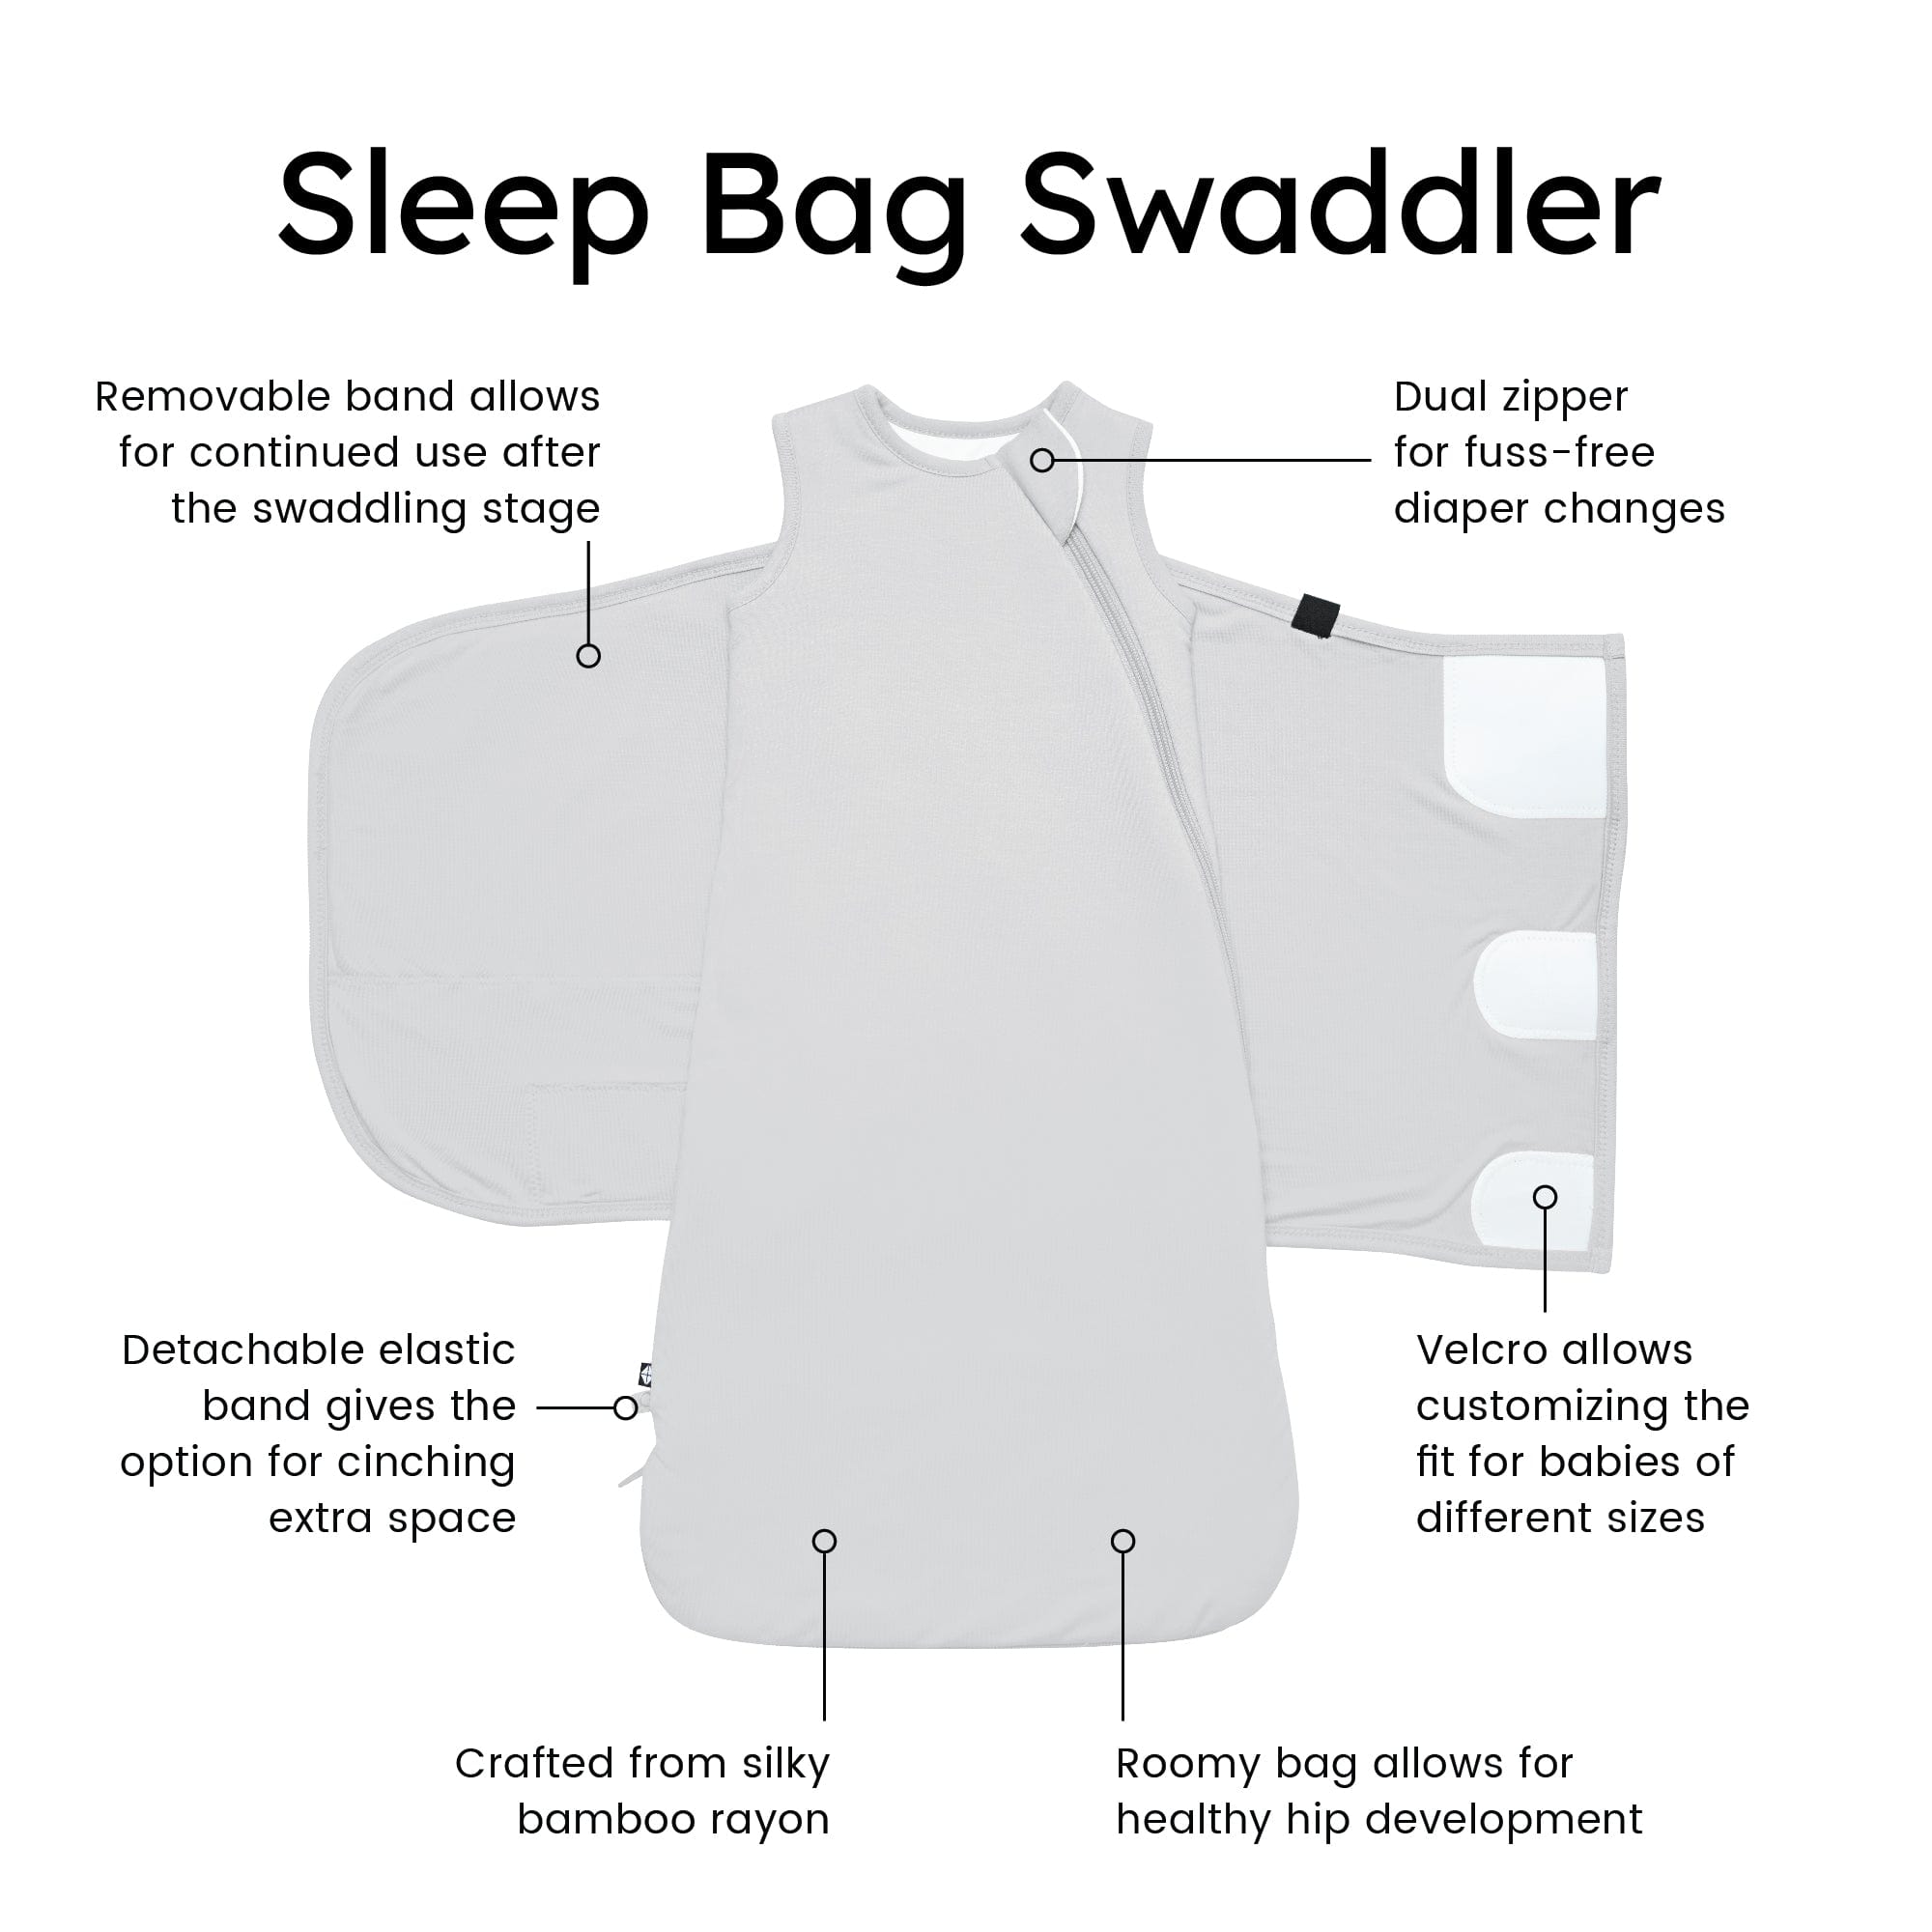 Kyte Baby Sleep Bag Swaddler in Storm with benefits listed